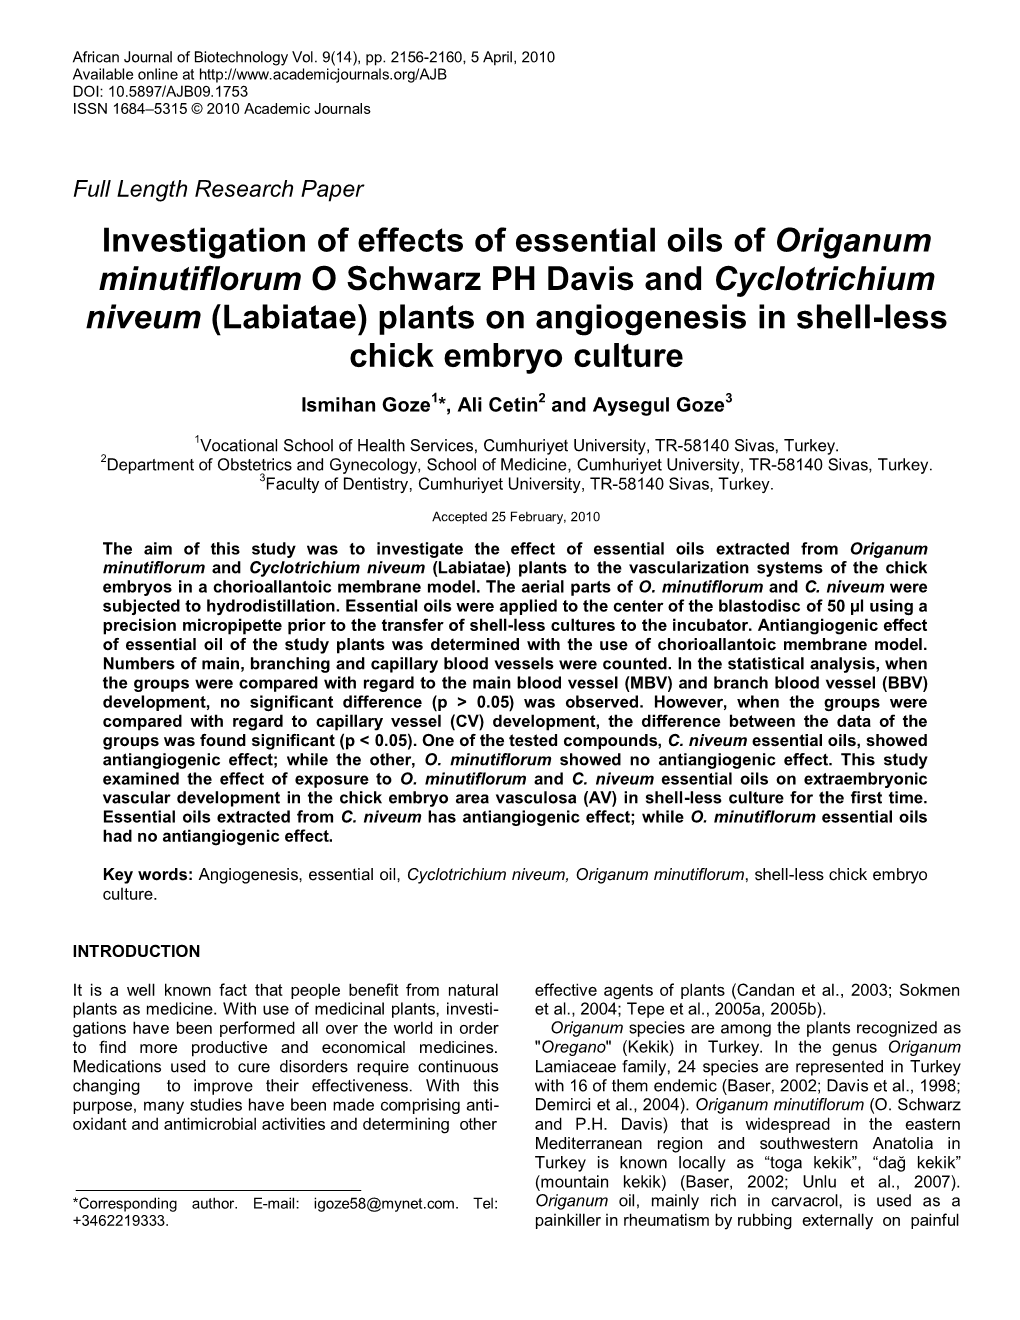 Investigation of Effects of Essential Oils Of